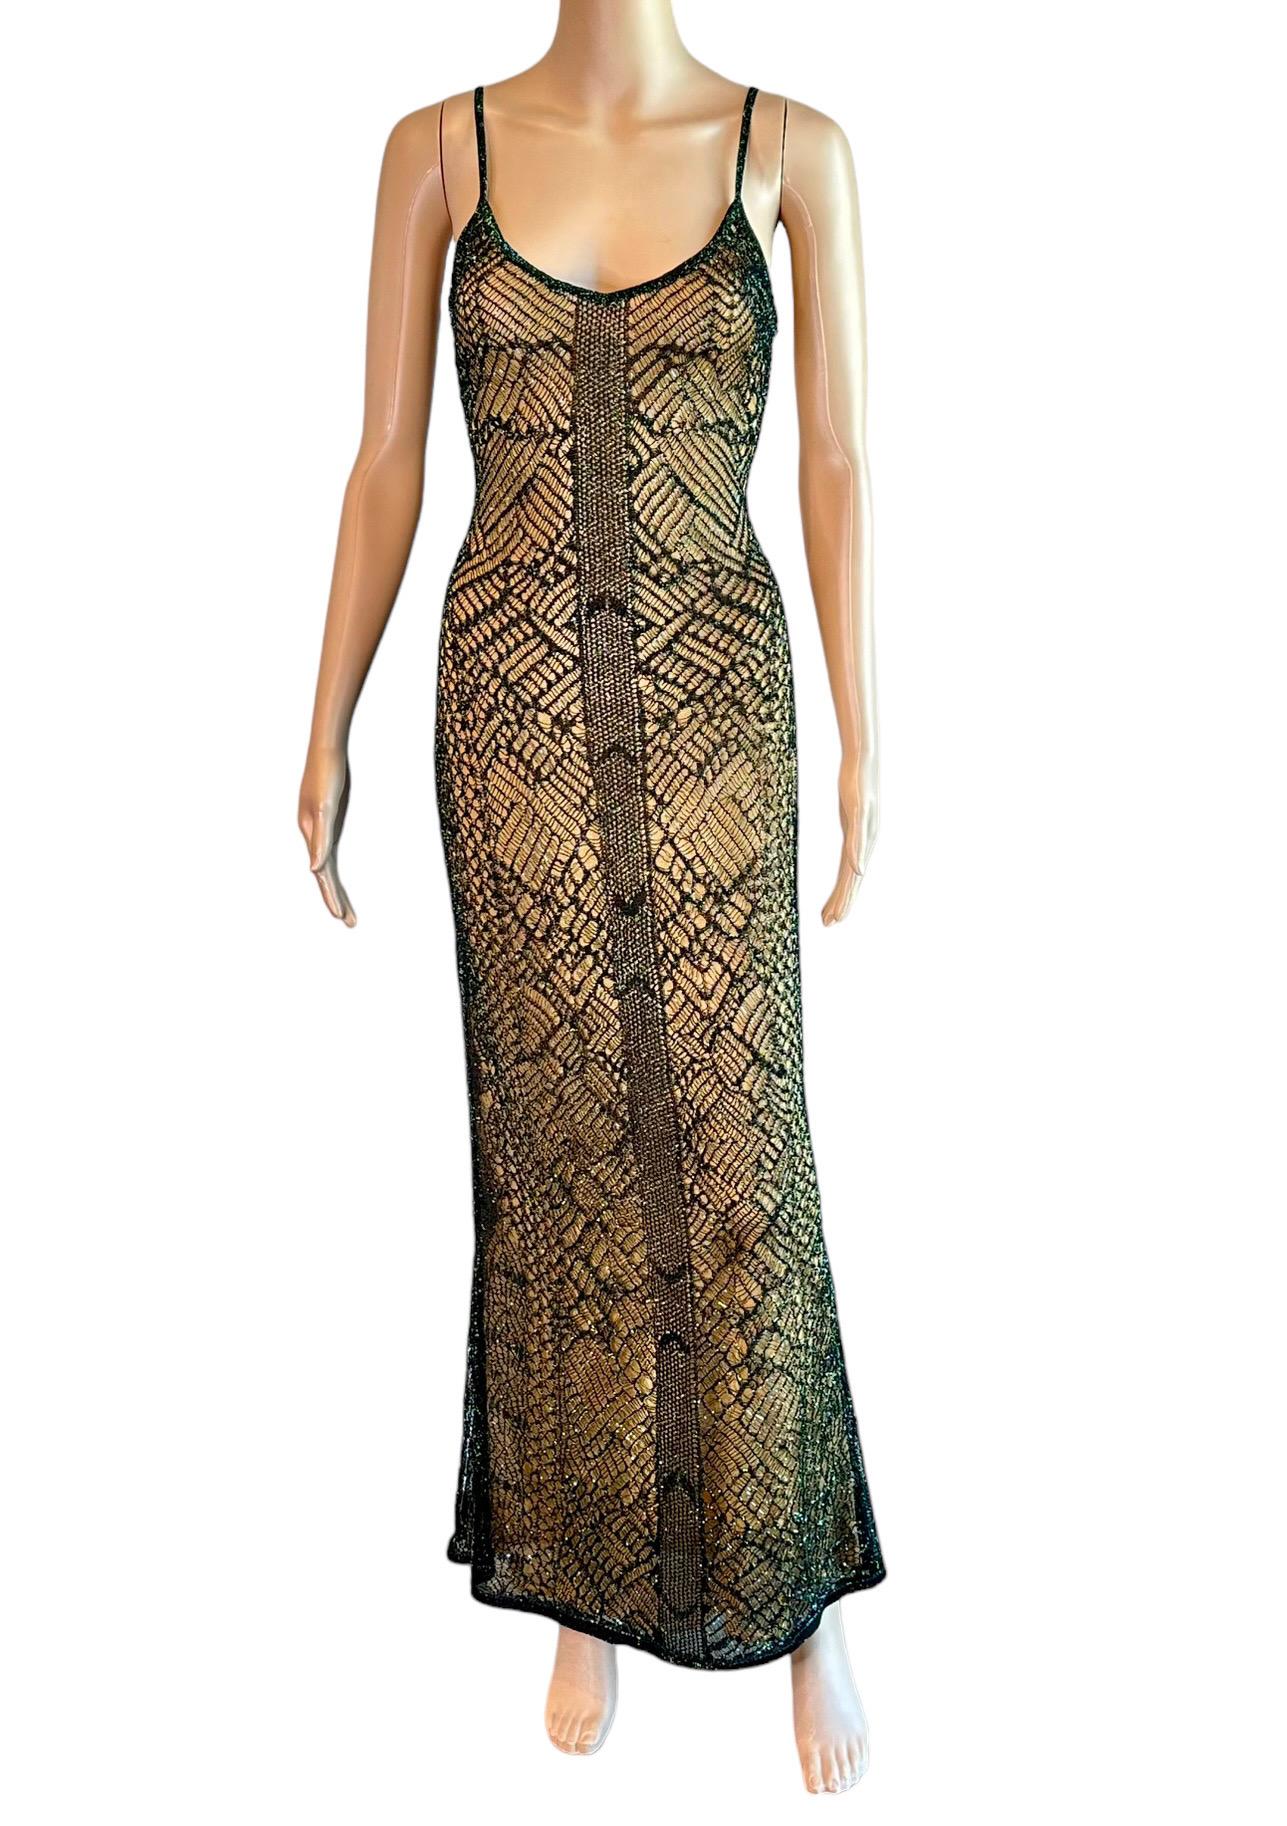 Thierry Mugler Couture Vintage Semi-Sheer Open Knit Crochet Maxi Evening Dress  In Good Condition For Sale In Naples, FL